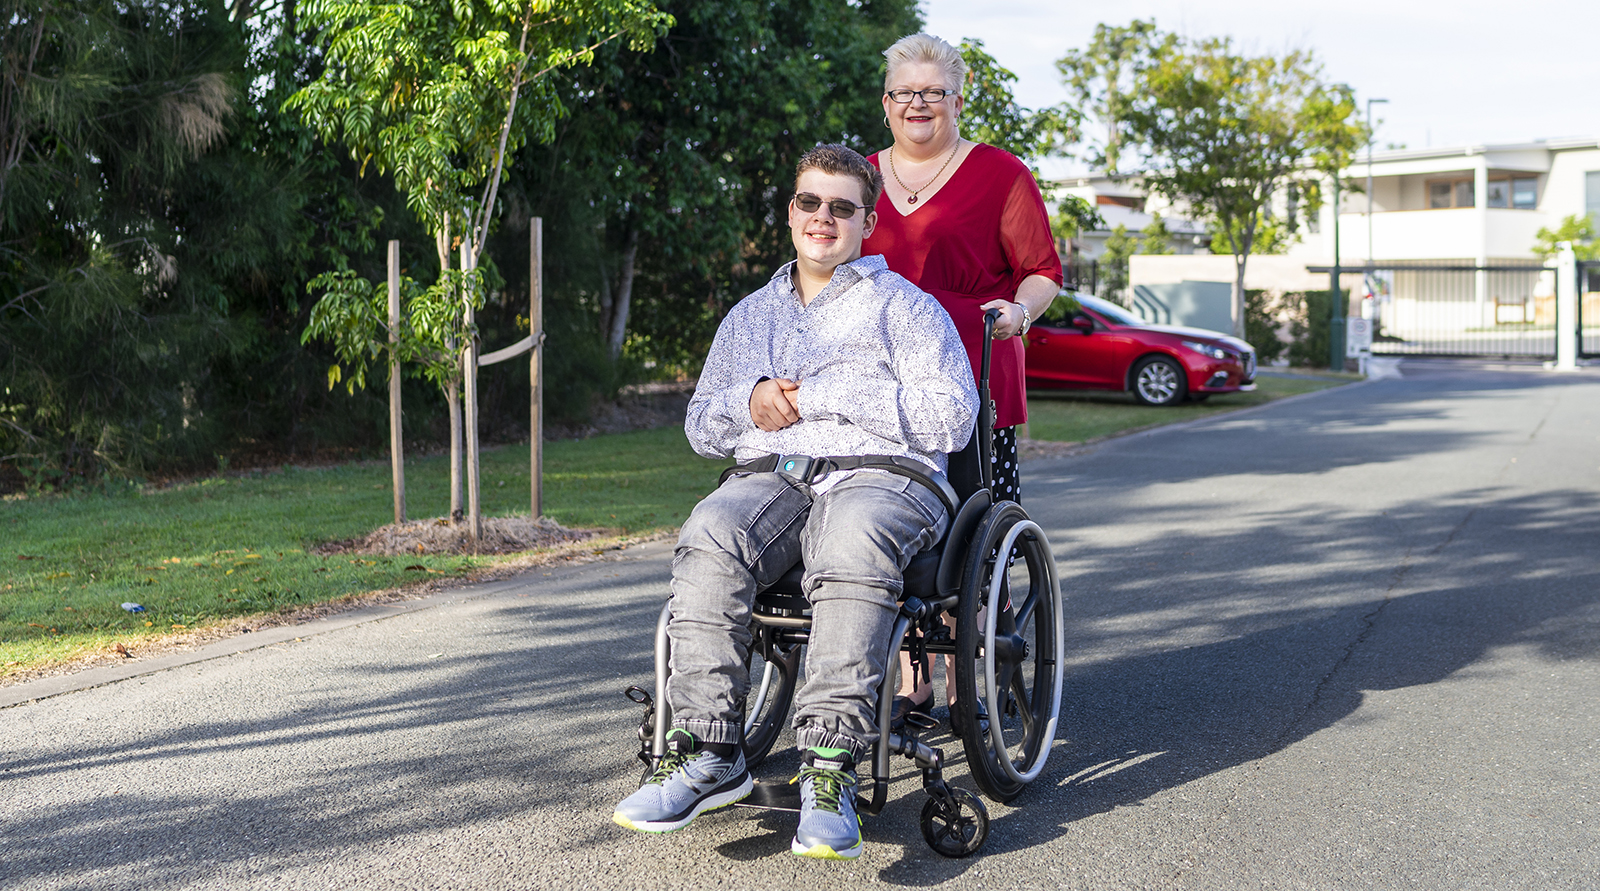 Drew seated in a wheelchair, with mum Kelly standing behind him